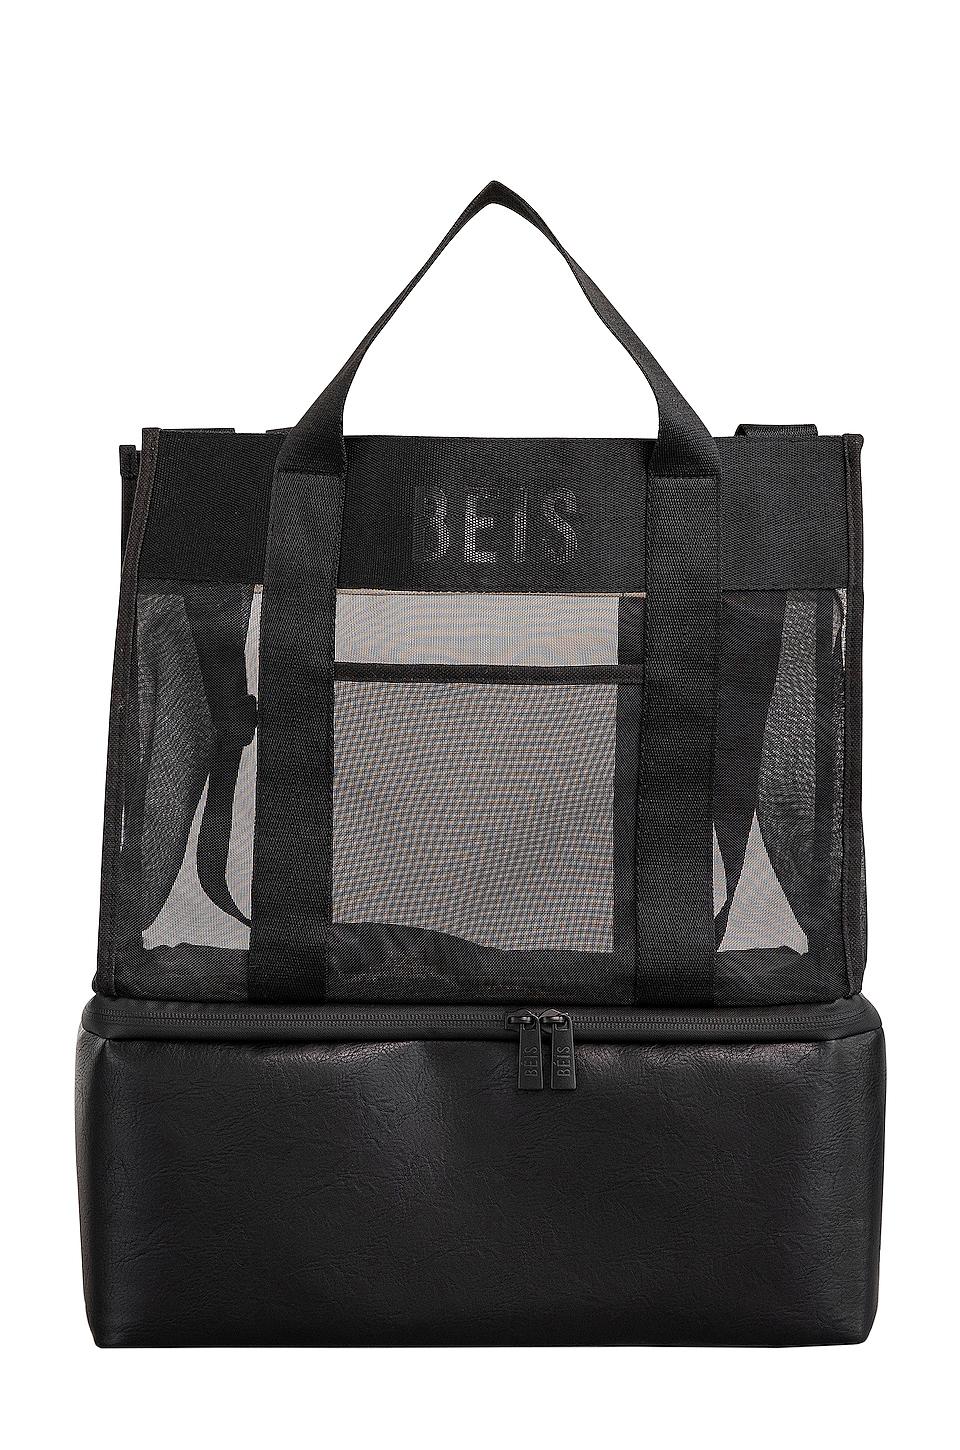 $156 bag available on revolveclothing.com in 2023